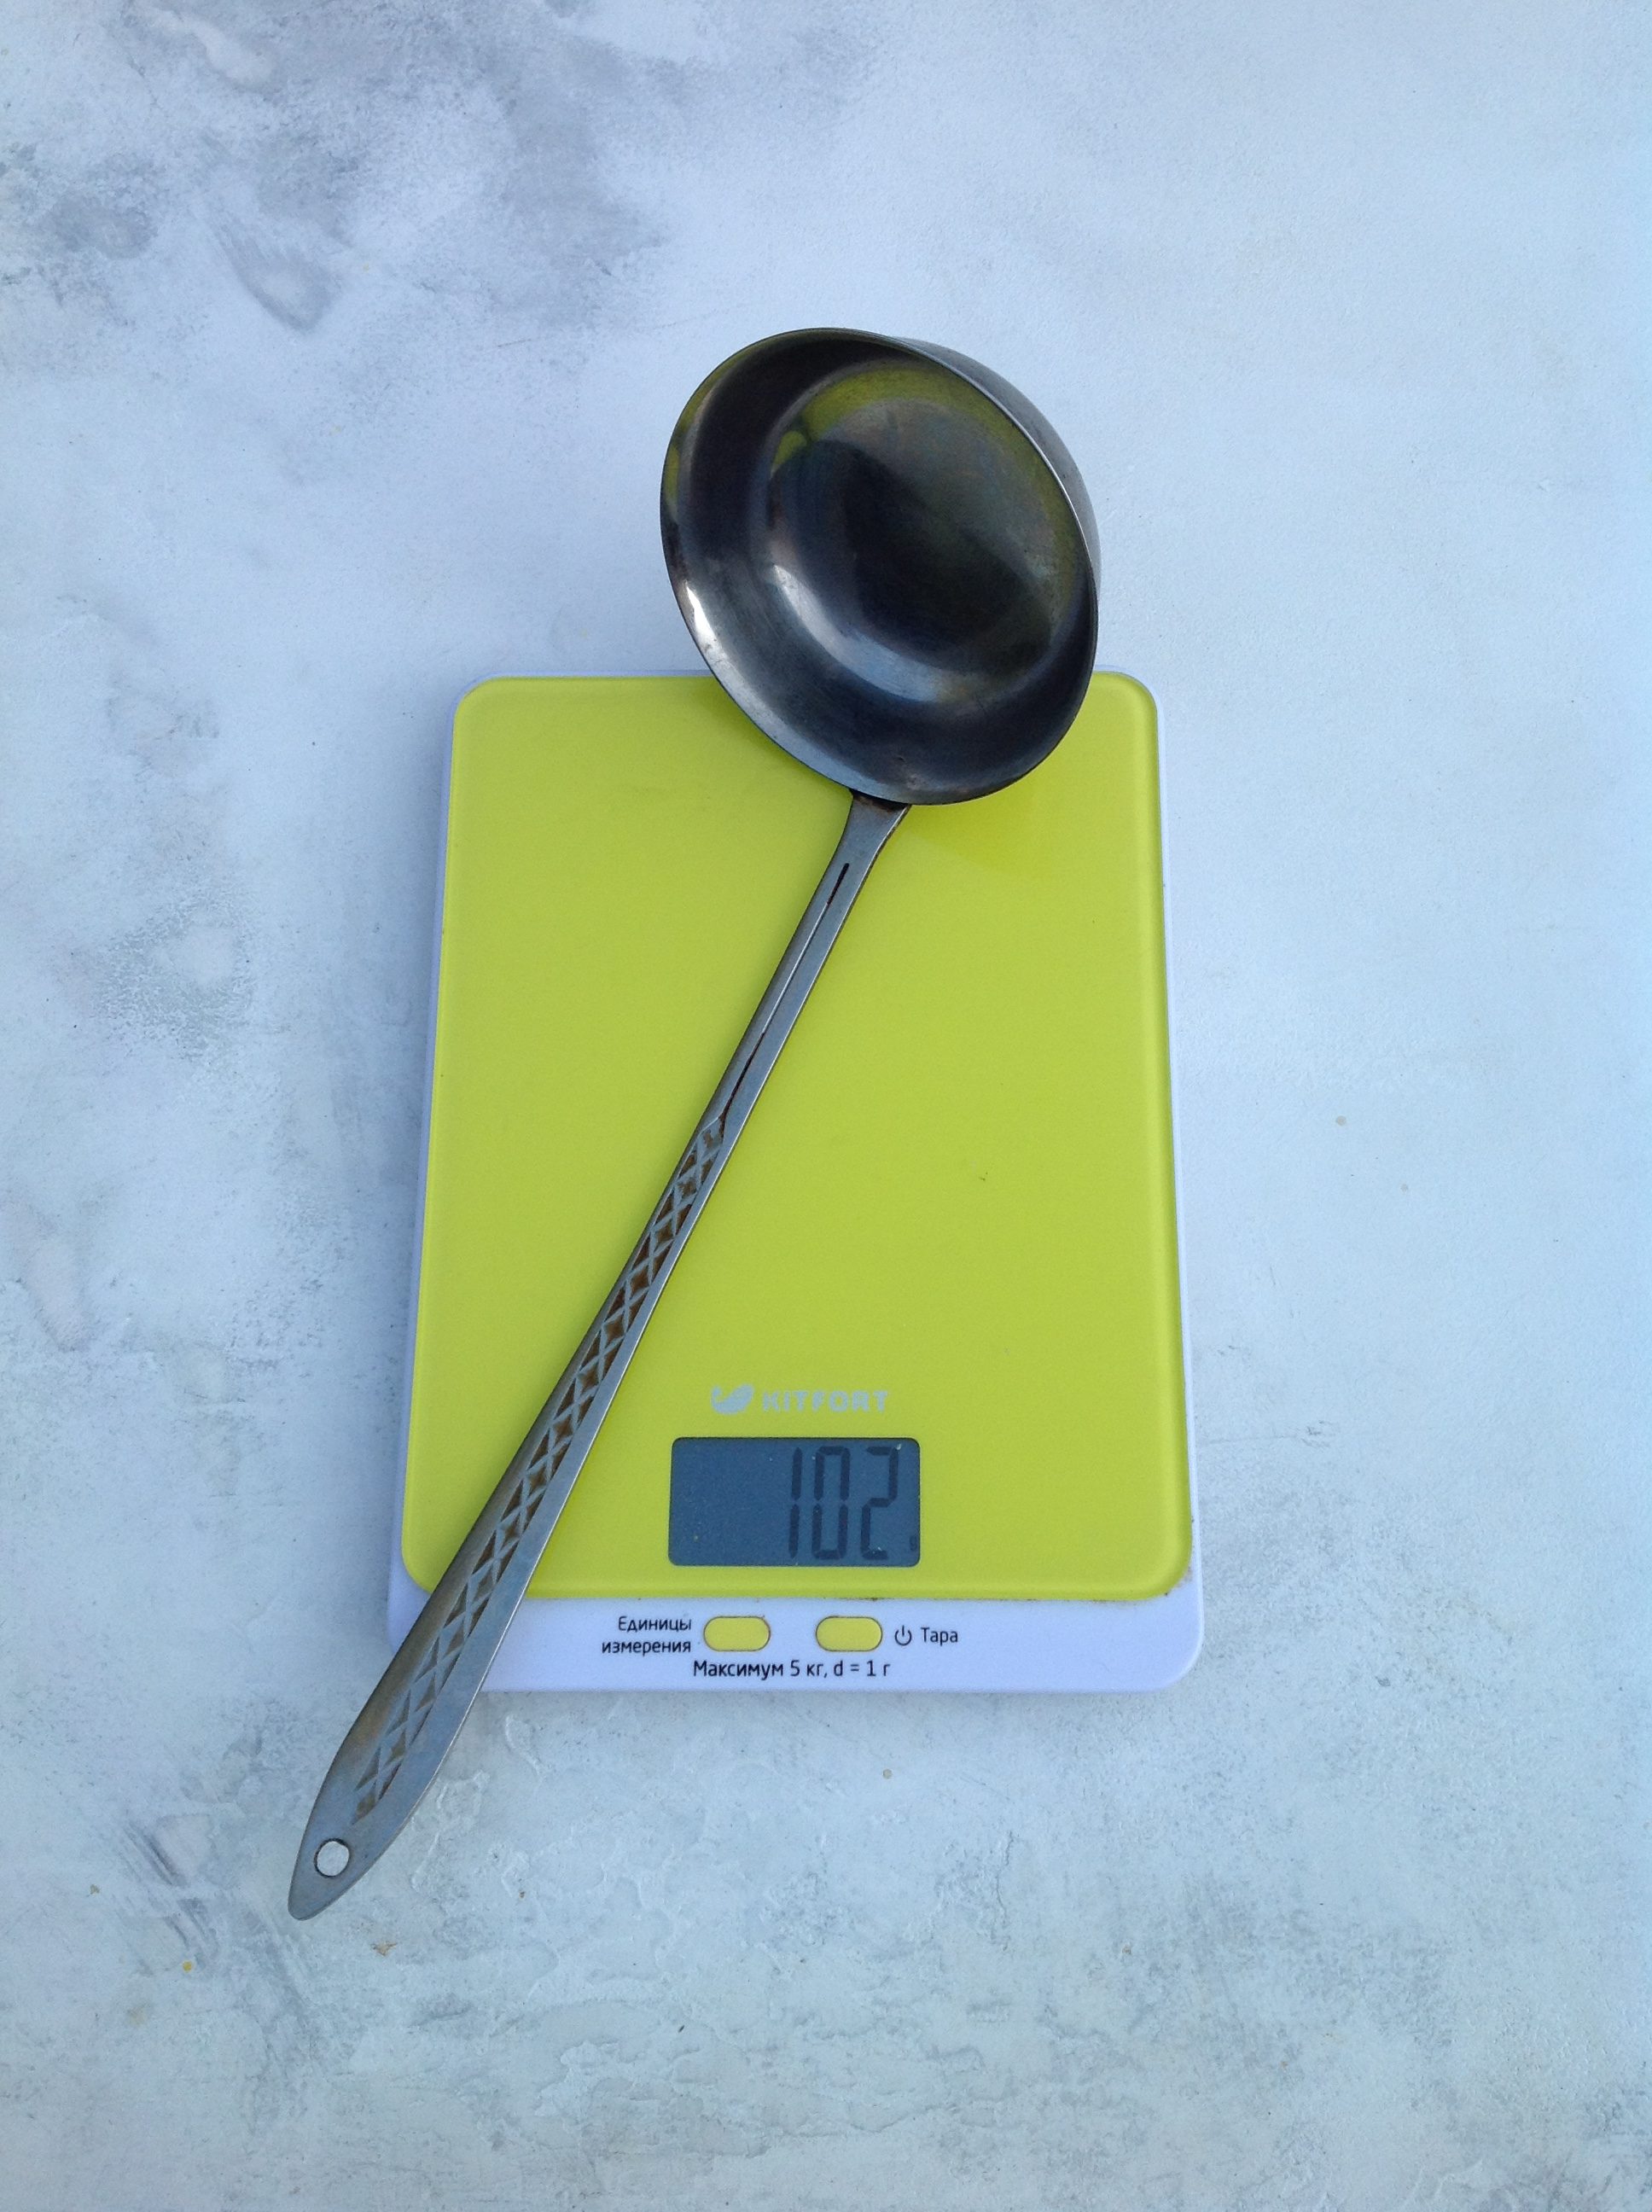 weight of a large ladle